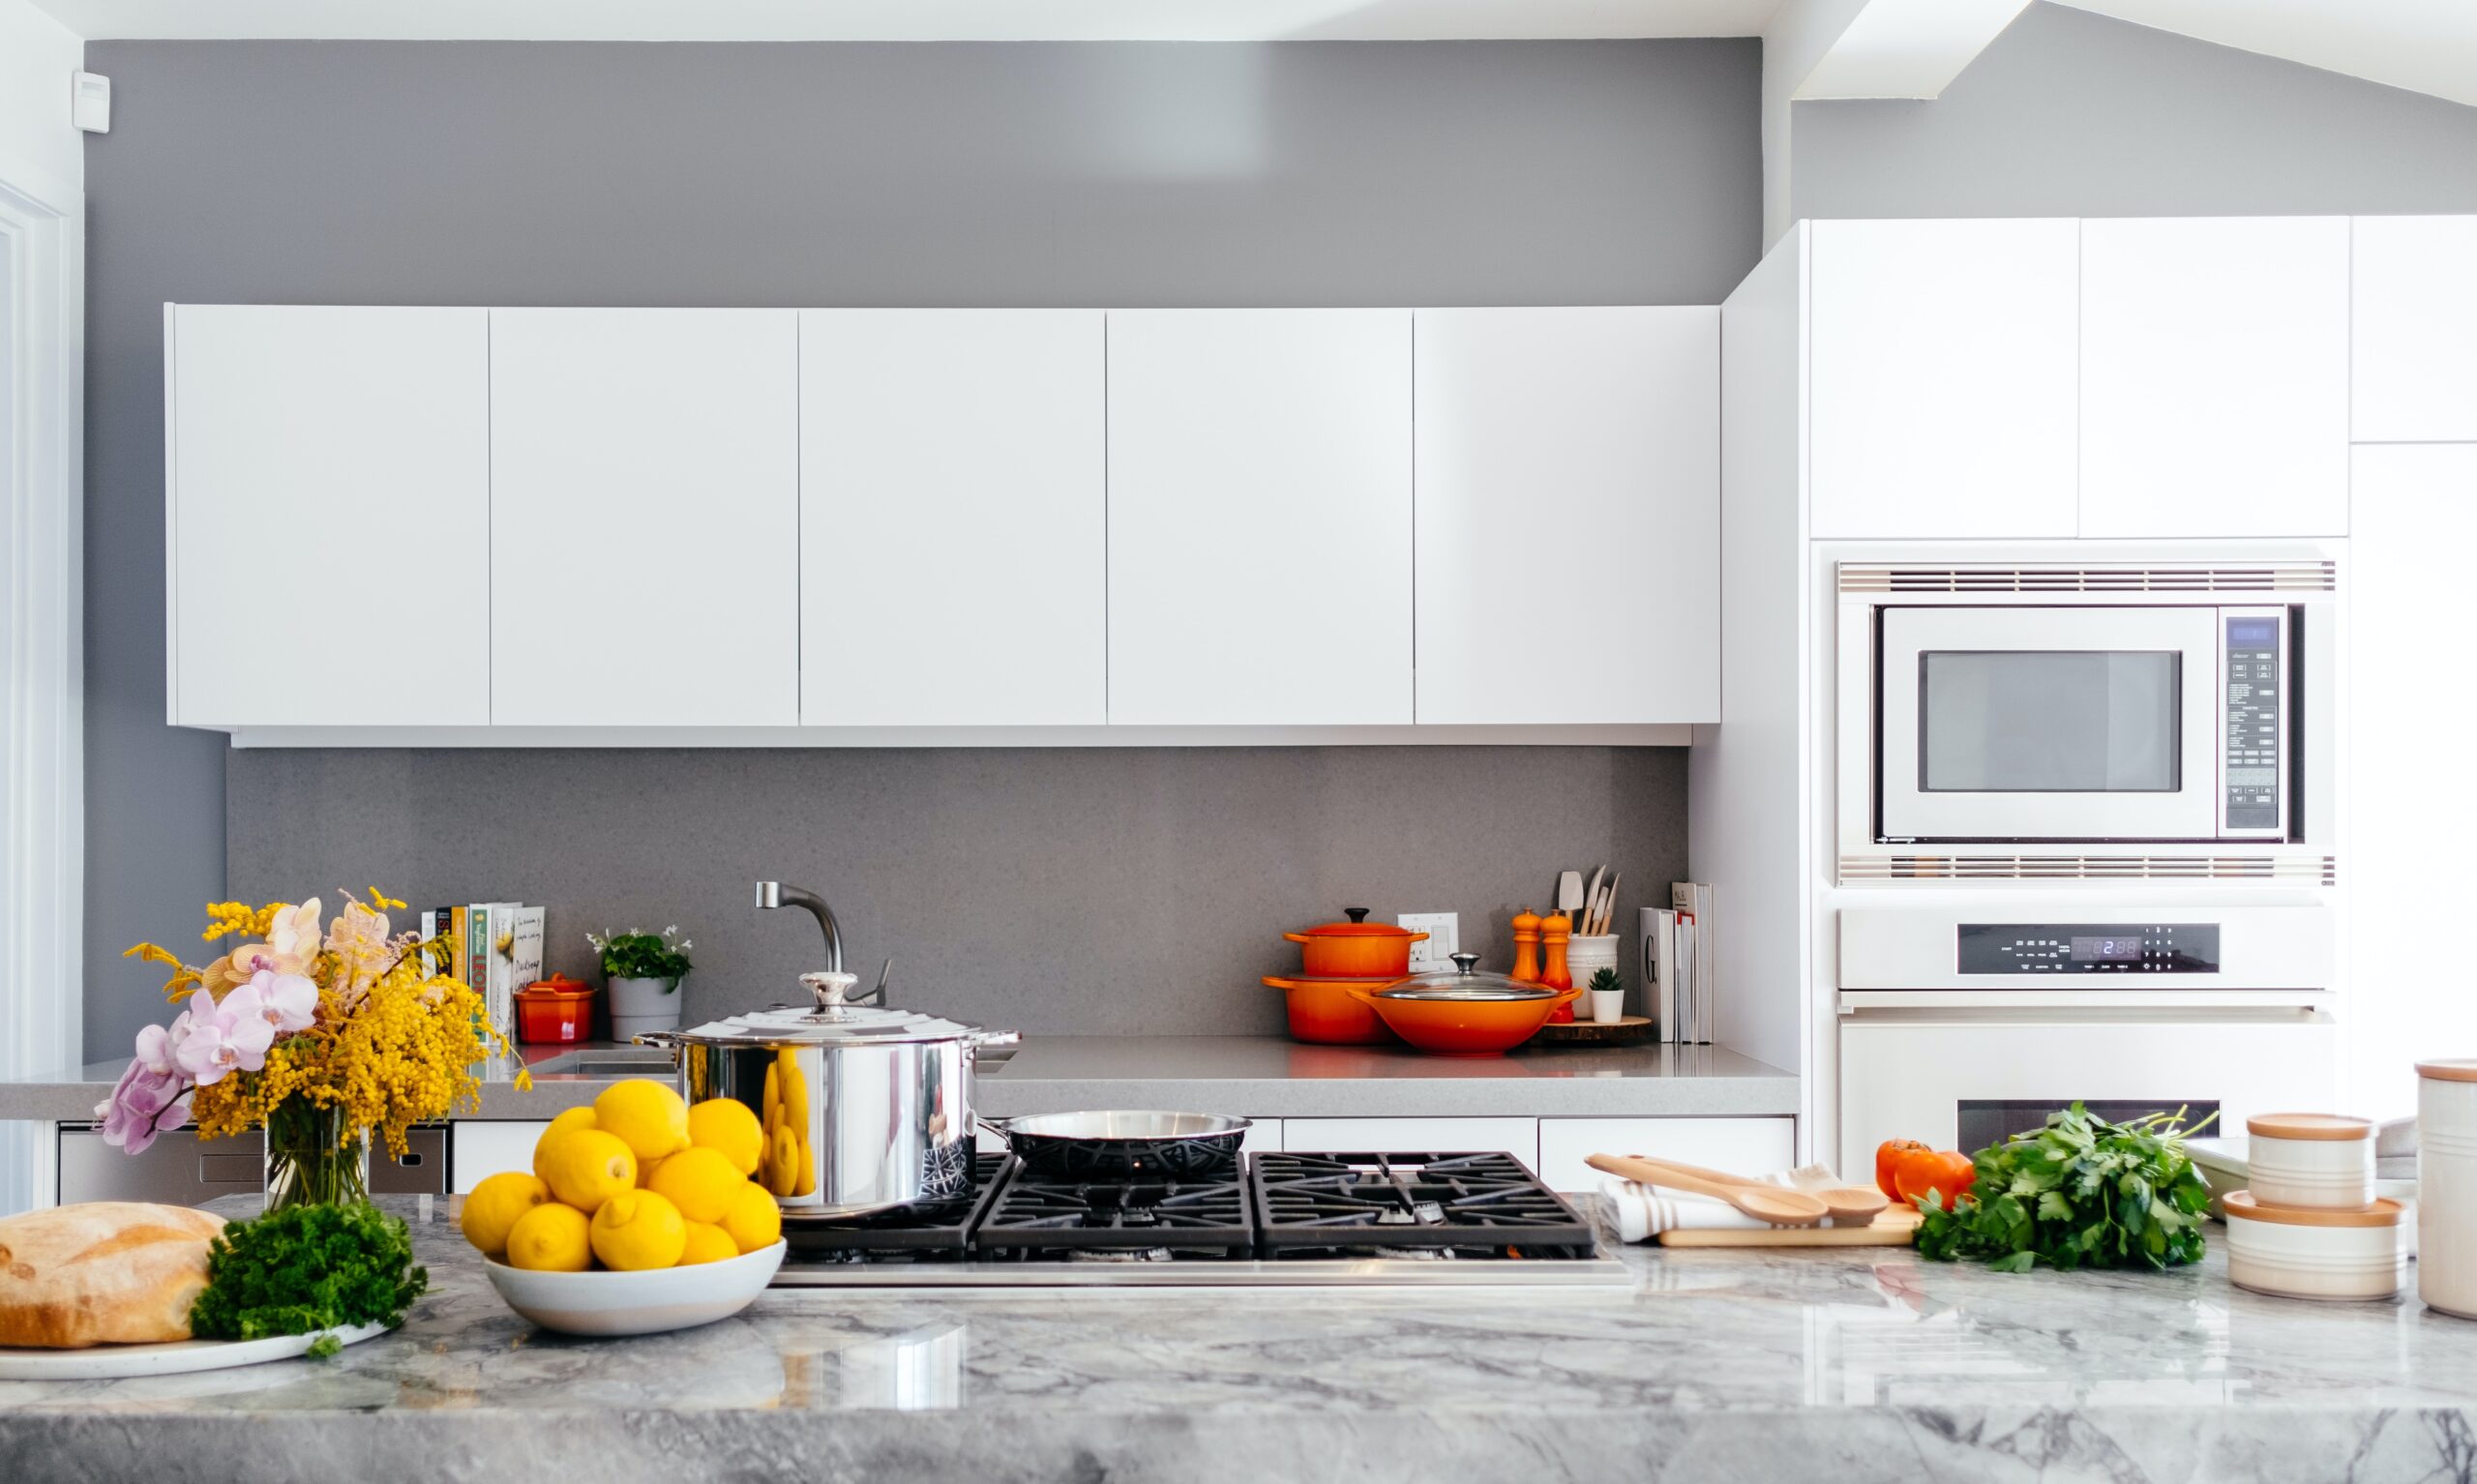 How to Pick the Perfect Material for Your Kitchen Countertops